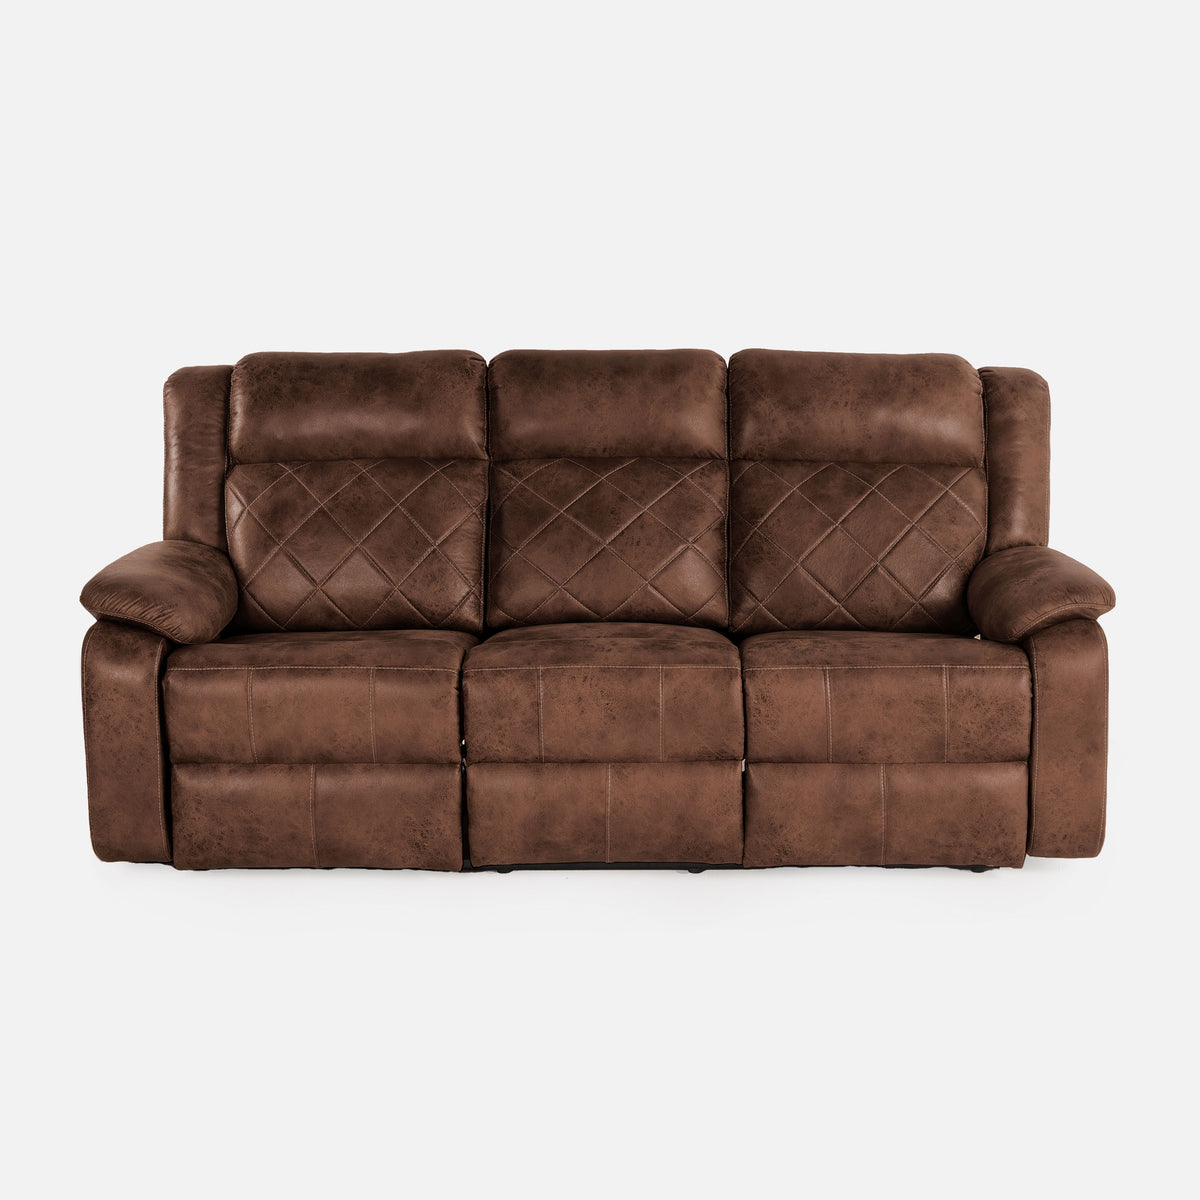 Marvin 3 Seater Recliner Sofa